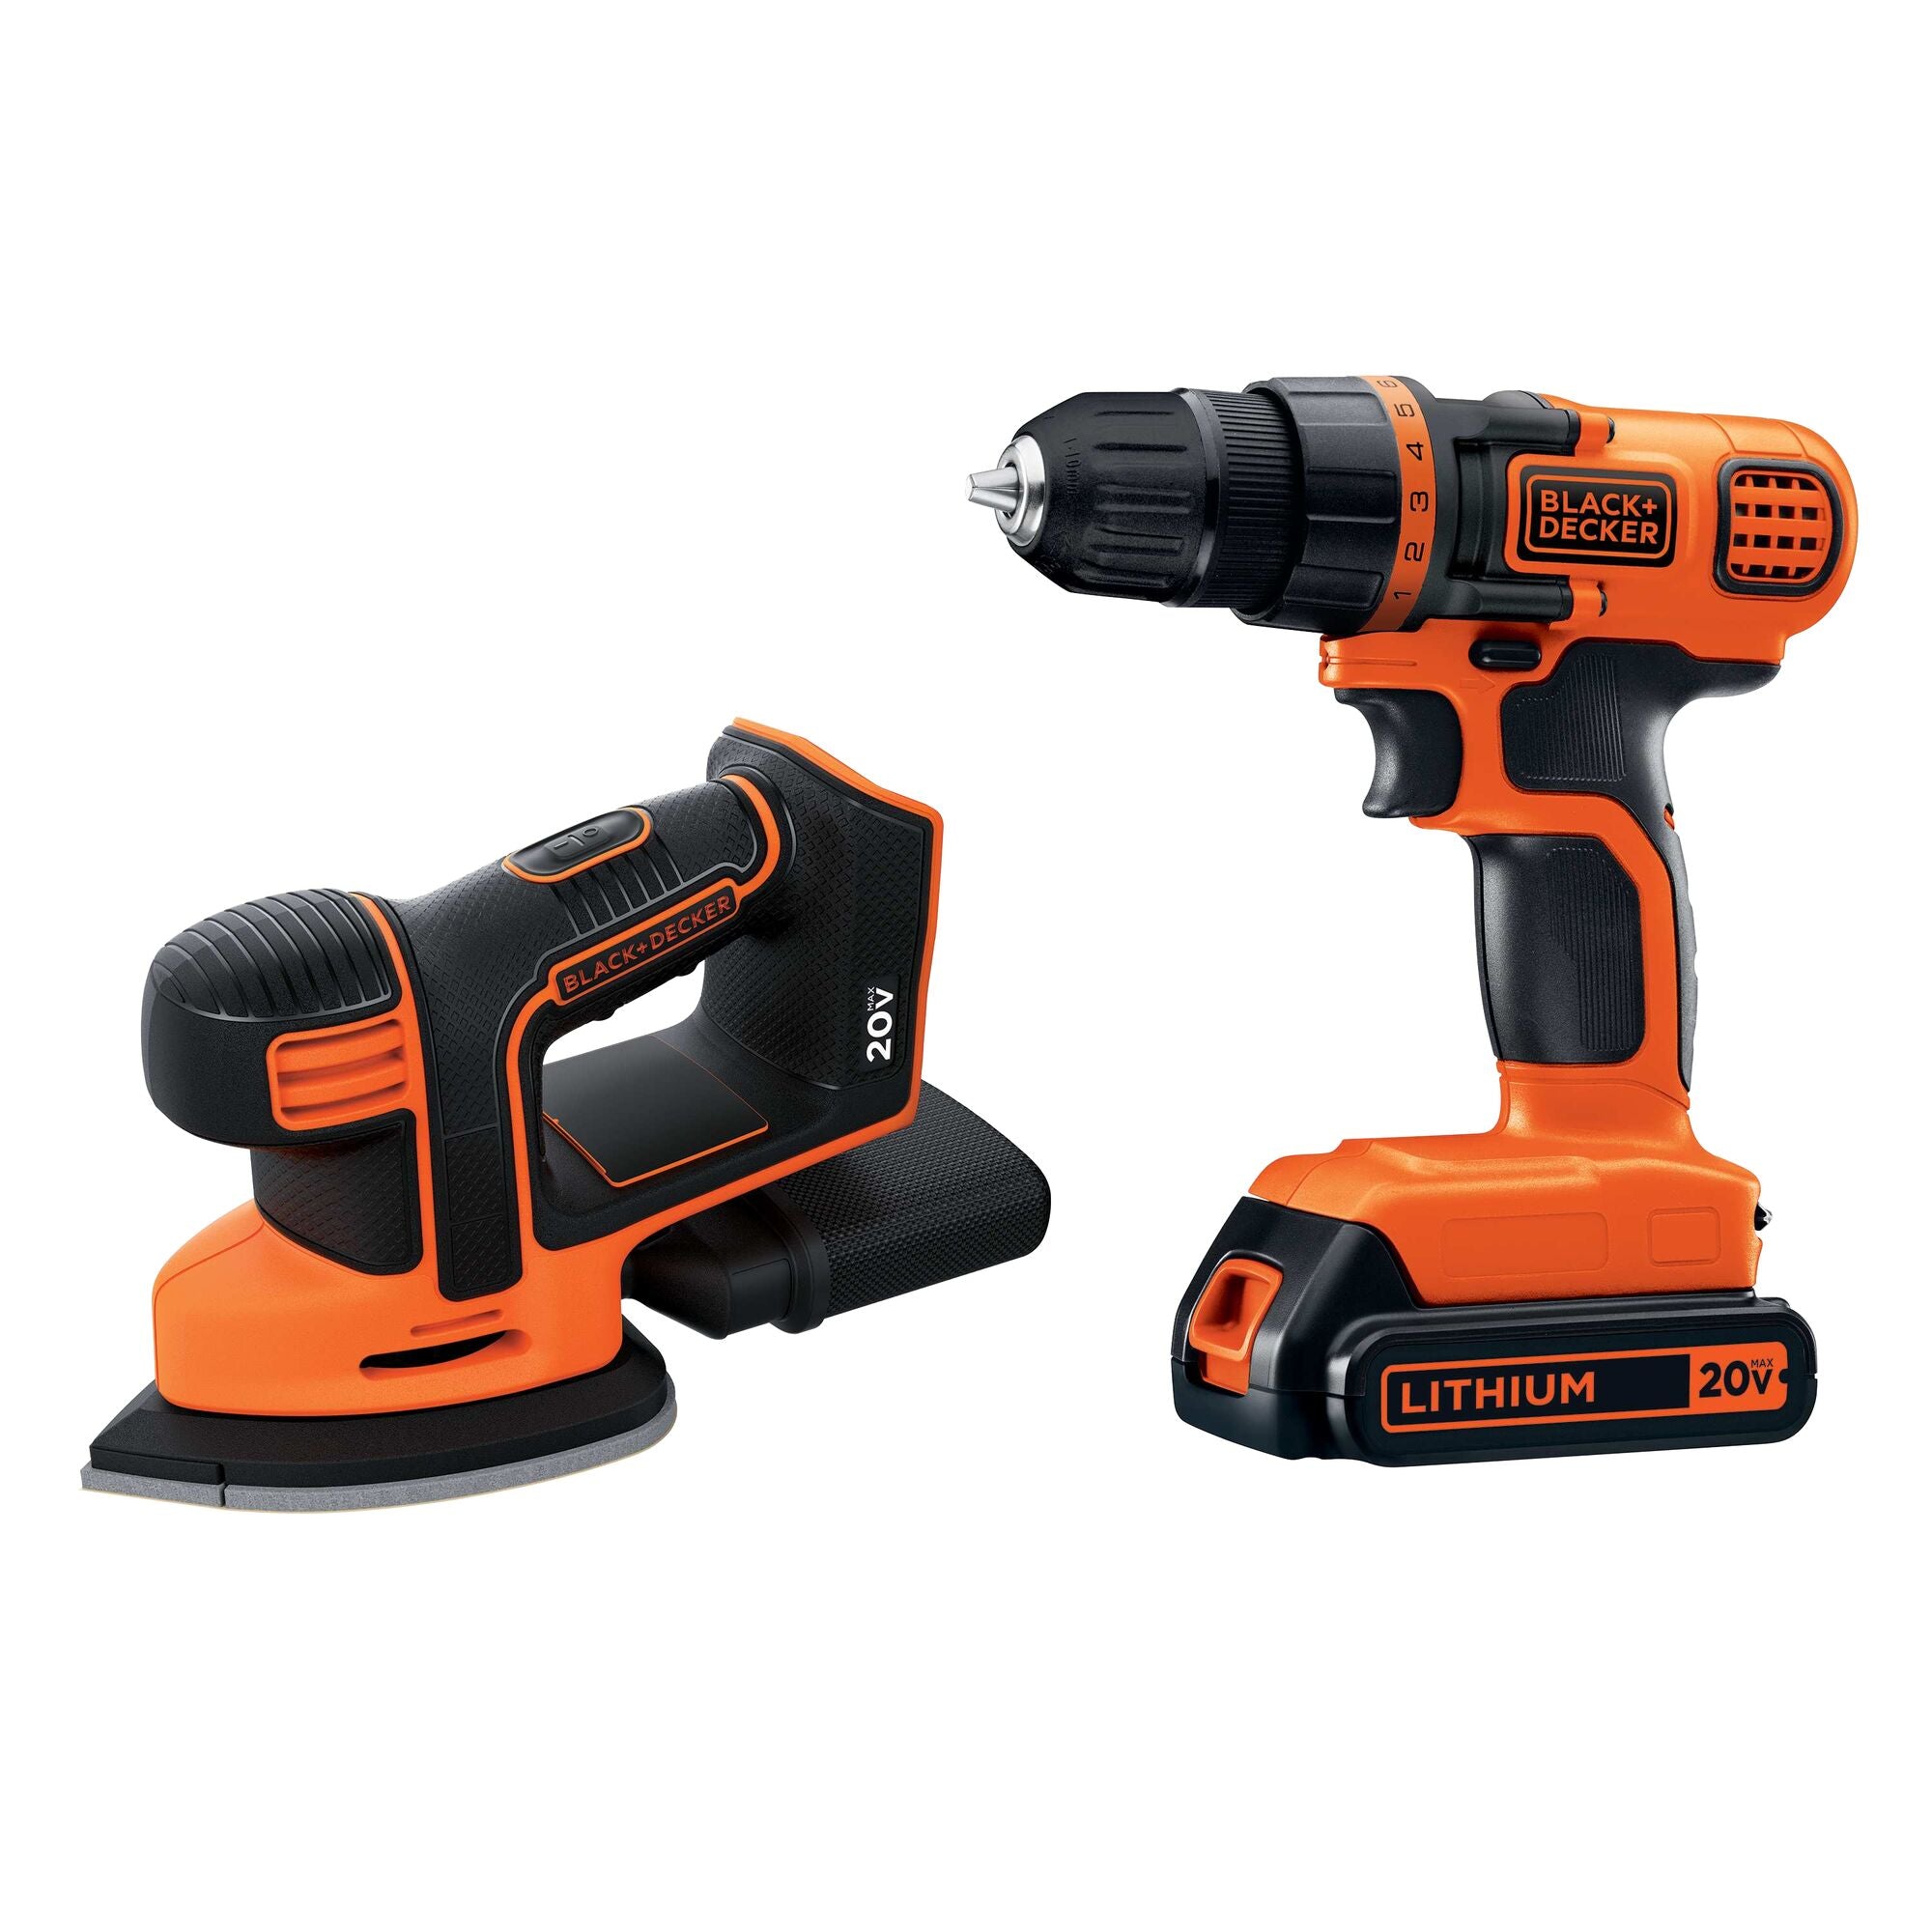 Black and Decker Multievo Corded and Codless Drills Review 